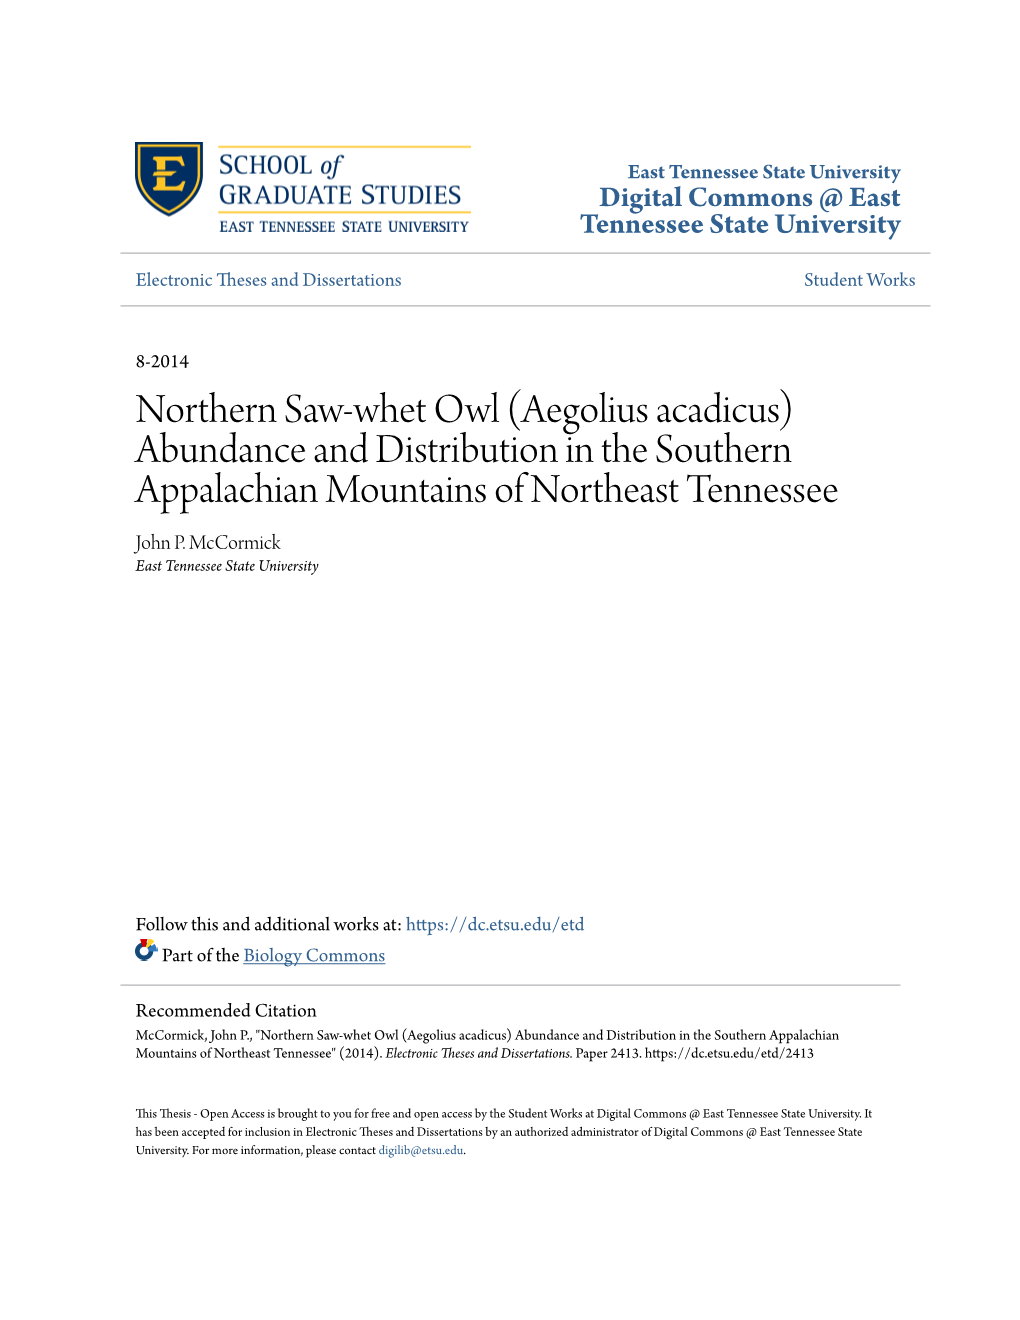 Northern Saw-Whet Owl (Aegolius Acadicus) Abundance and Distribution in the Southern Appalachian Mountains of Northeast Tennessee John P